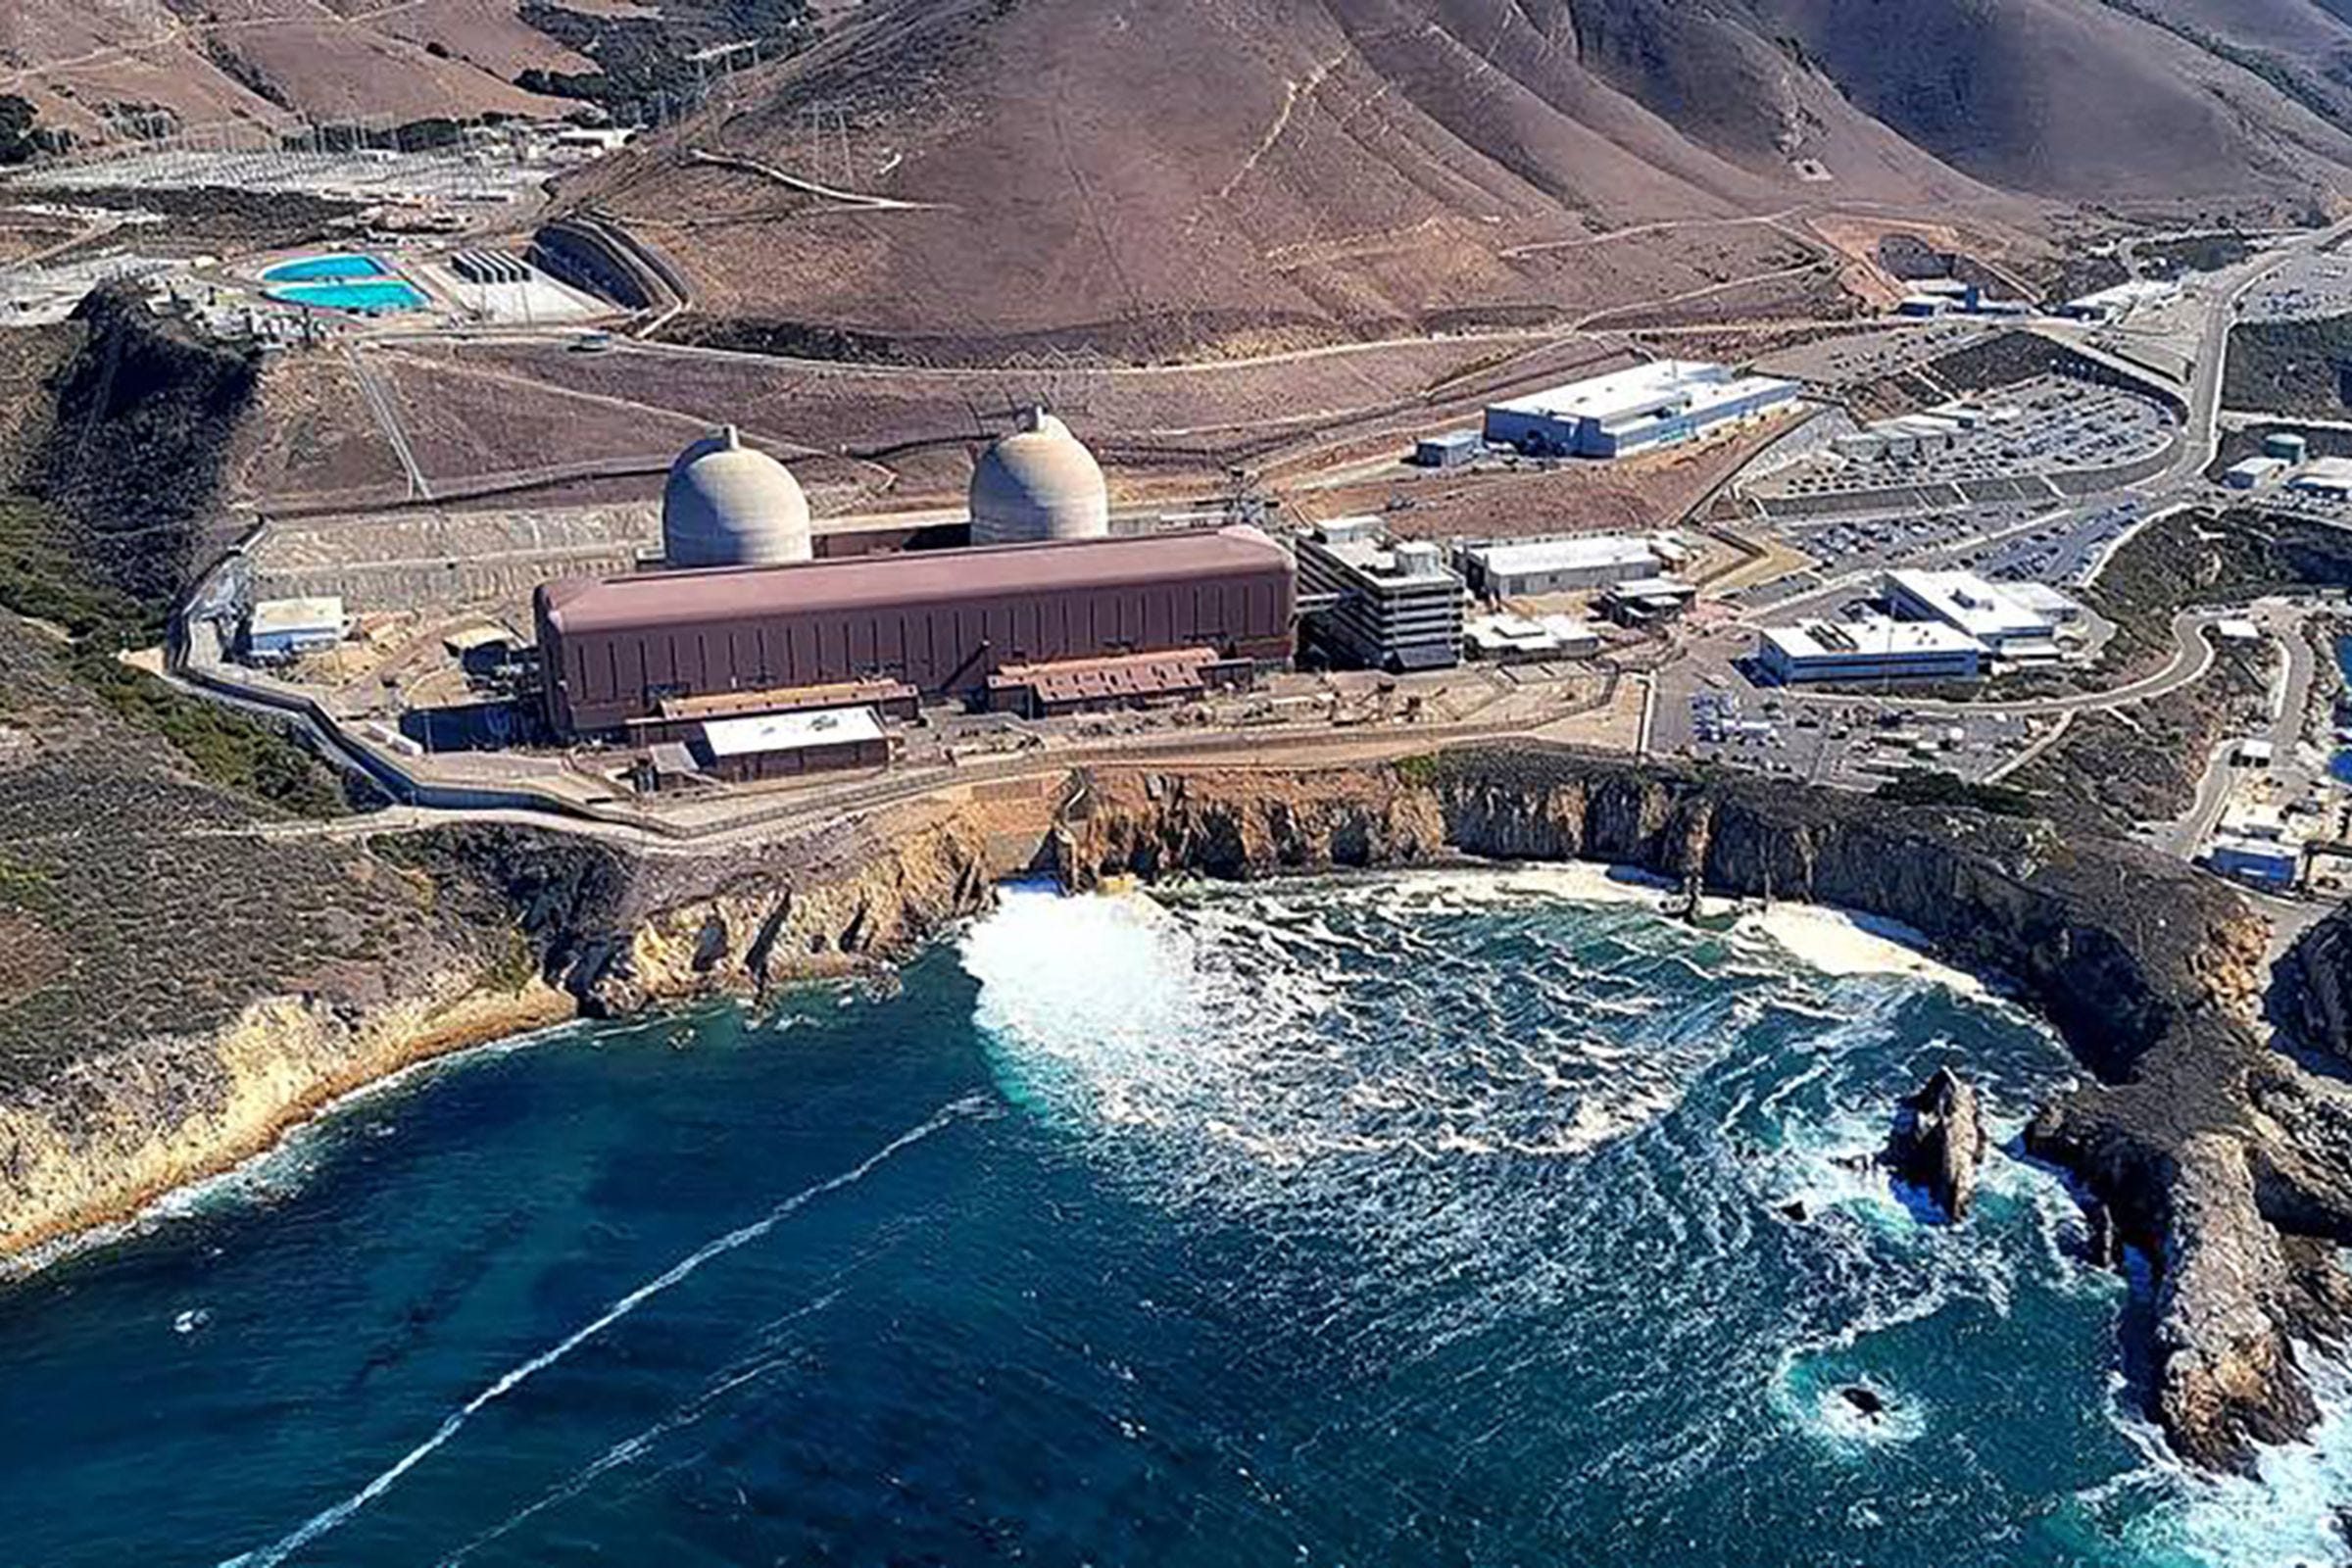 Aerial view of a nuclear power plant on the coast of California.